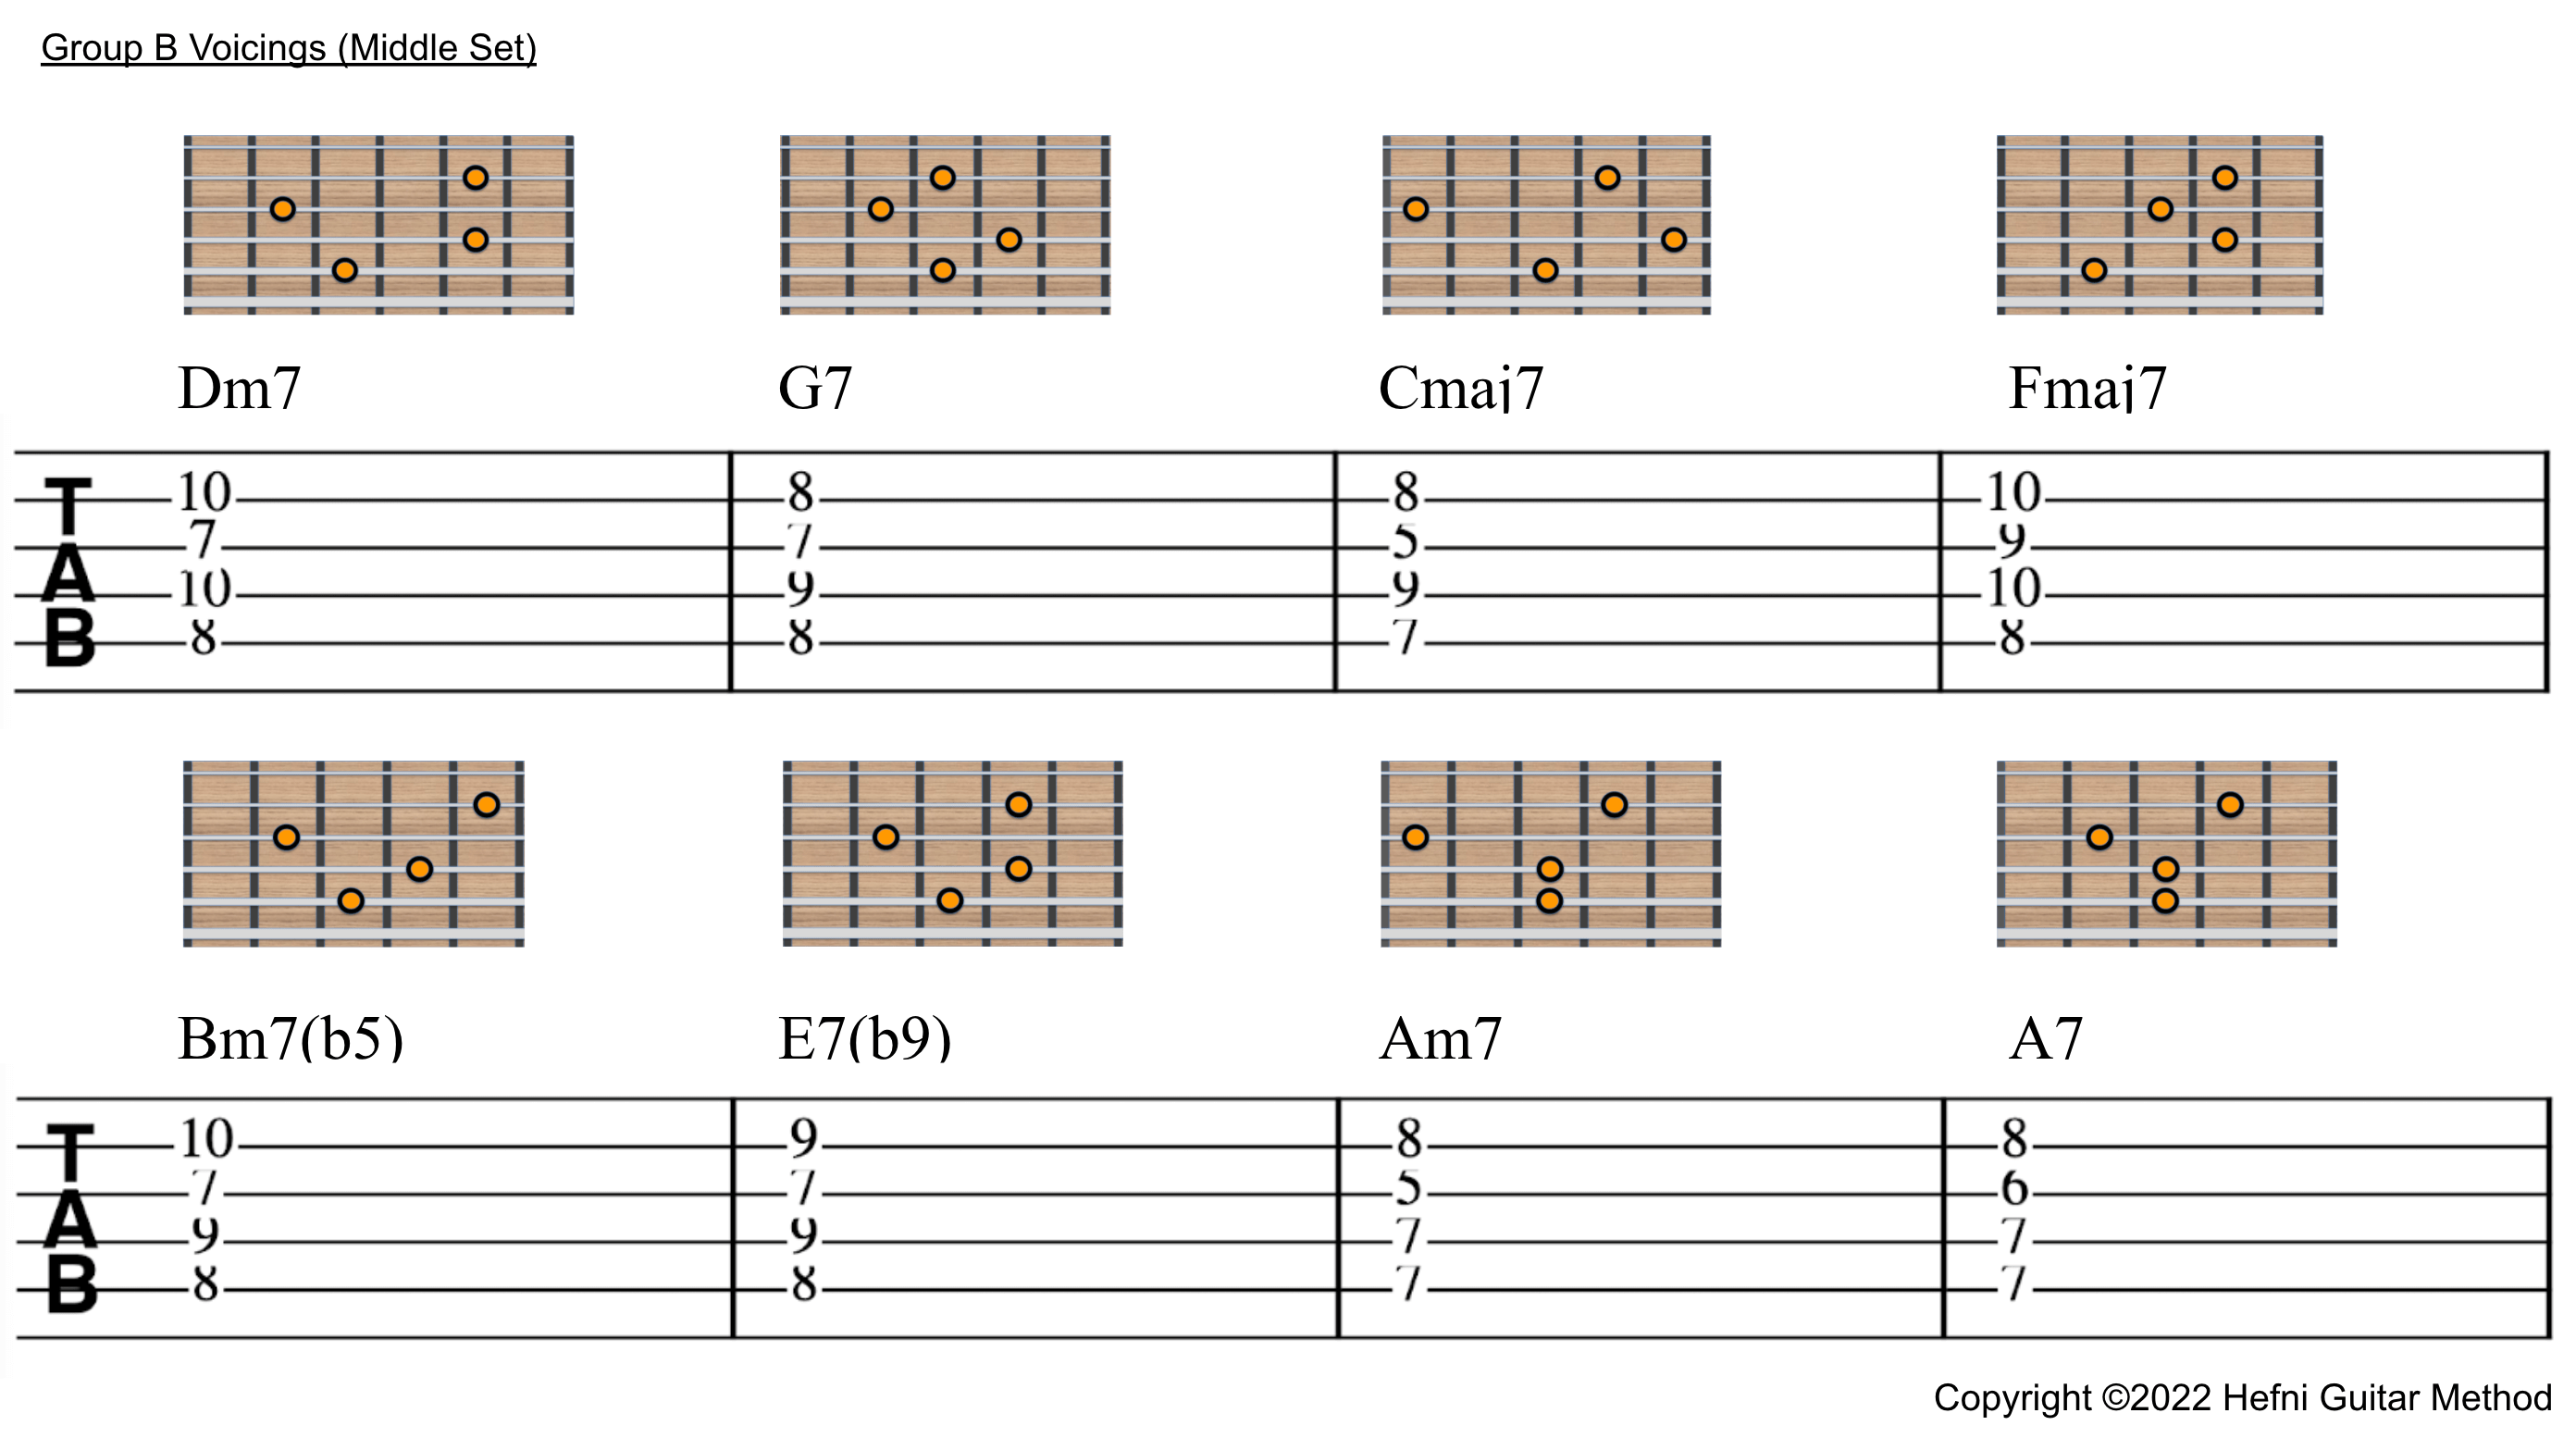 Jazz Chords Workshop Lesson 2 Jazz Group B Voicings (Middle Set)